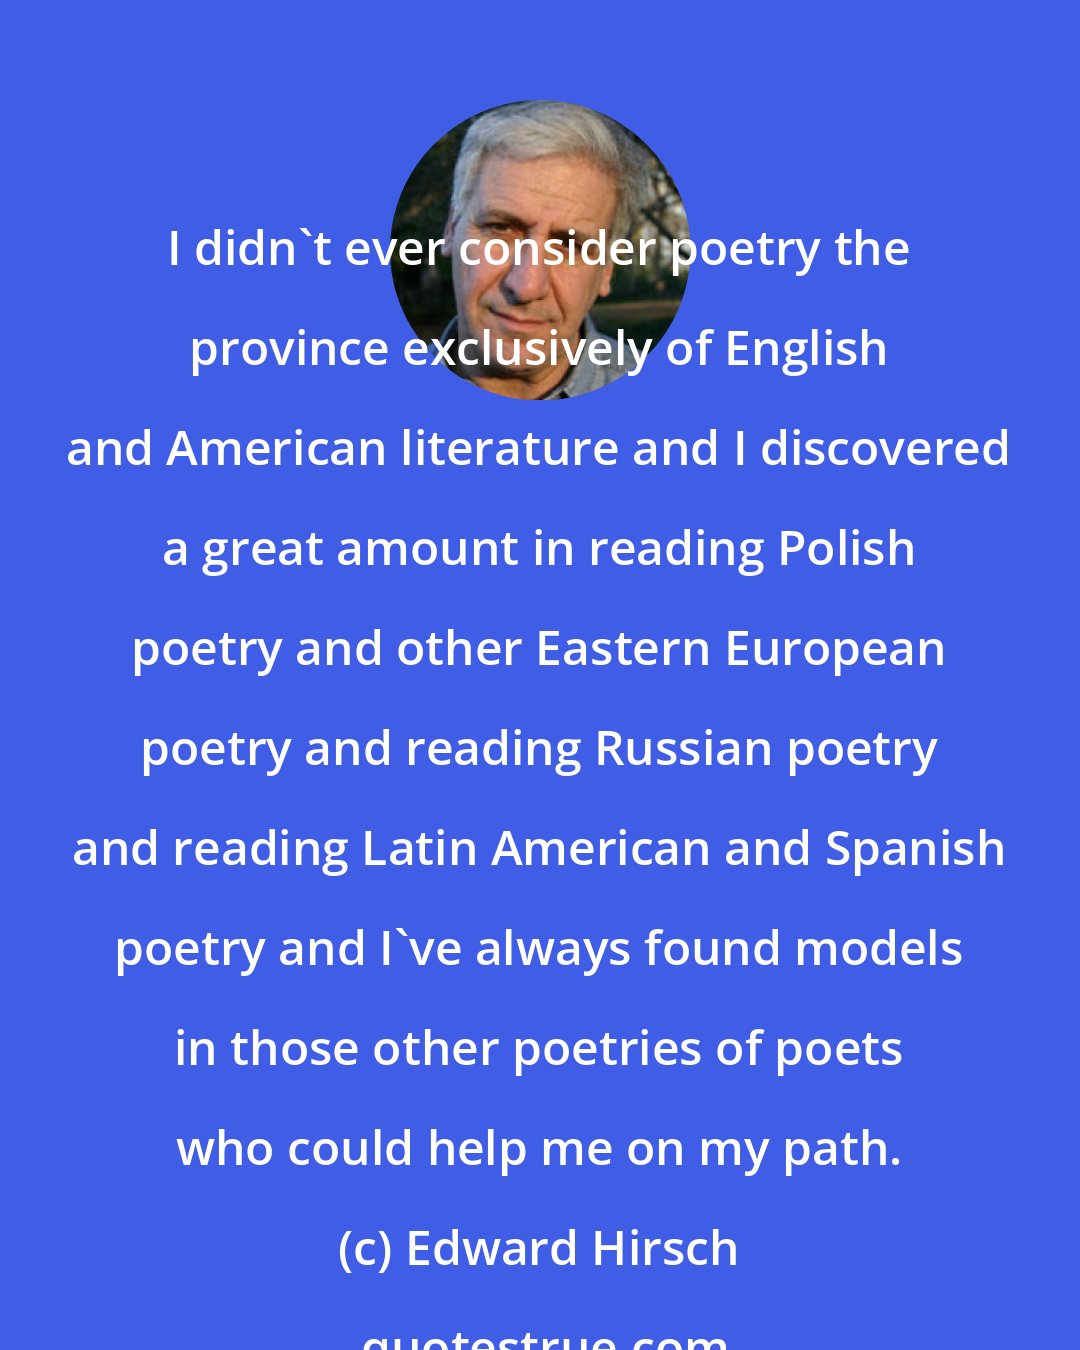 Edward Hirsch: I didn't ever consider poetry the province exclusively of English and American literature and I discovered a great amount in reading Polish poetry and other Eastern European poetry and reading Russian poetry and reading Latin American and Spanish poetry and I've always found models in those other poetries of poets who could help me on my path.